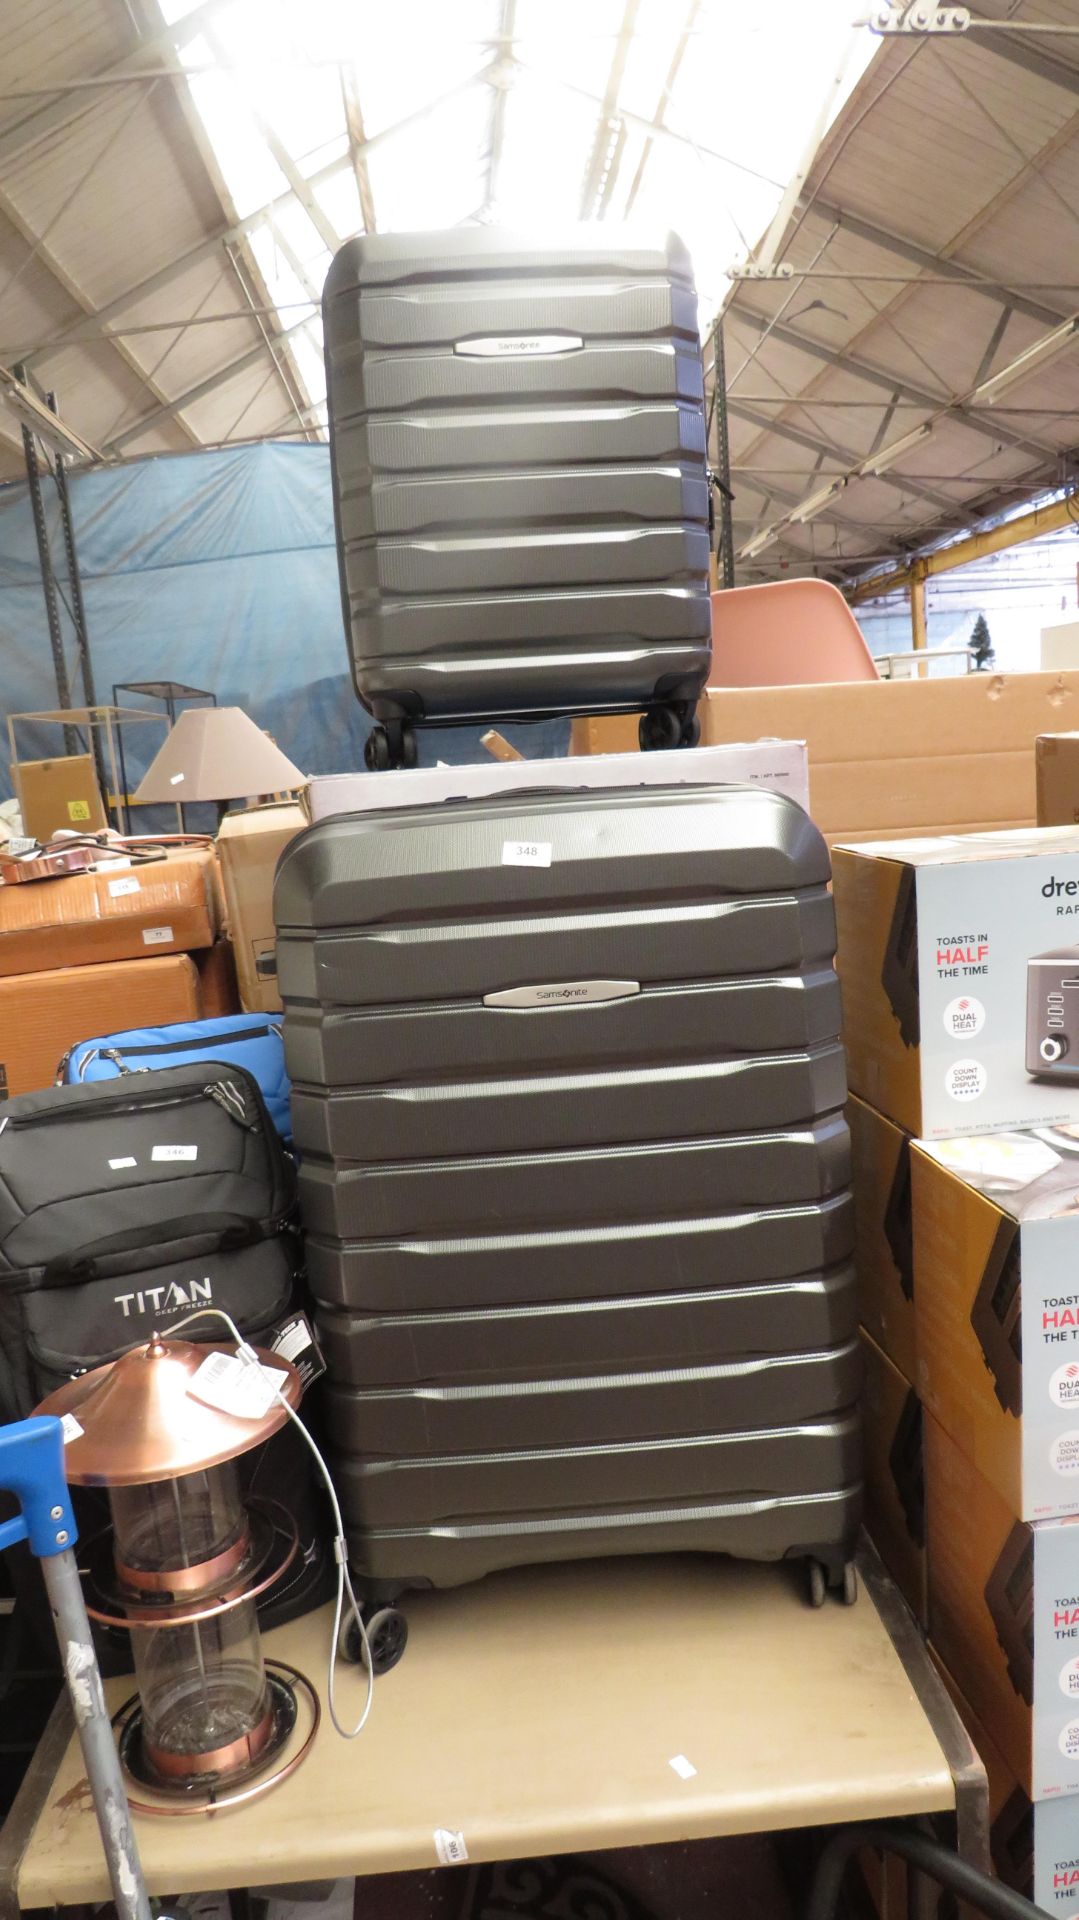 2X SAMSONITE TECH SUITCASES, 1X MEDIUM - LARGE, 1X SMALL rrp £139 BOXED UNCHECKED